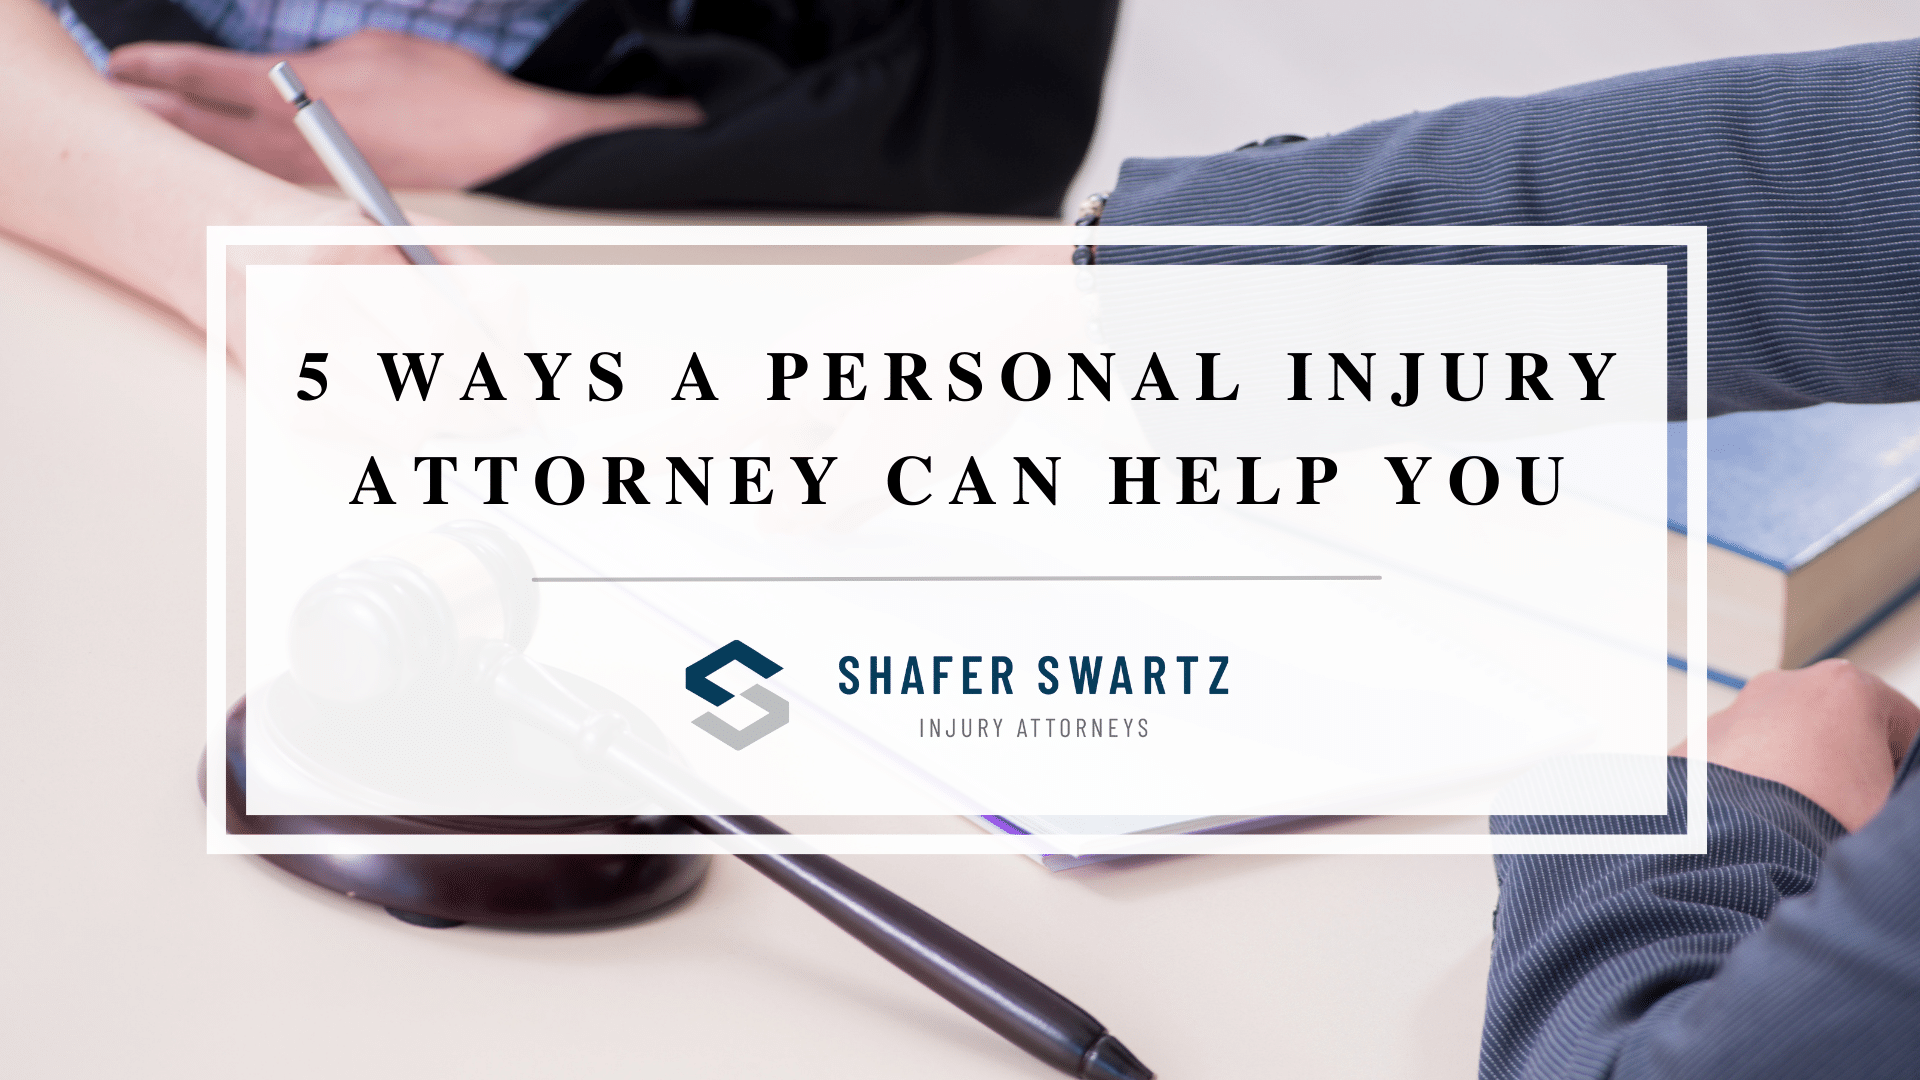 Featured image of 5 Ways a Personal Injury Attorney Can Help You